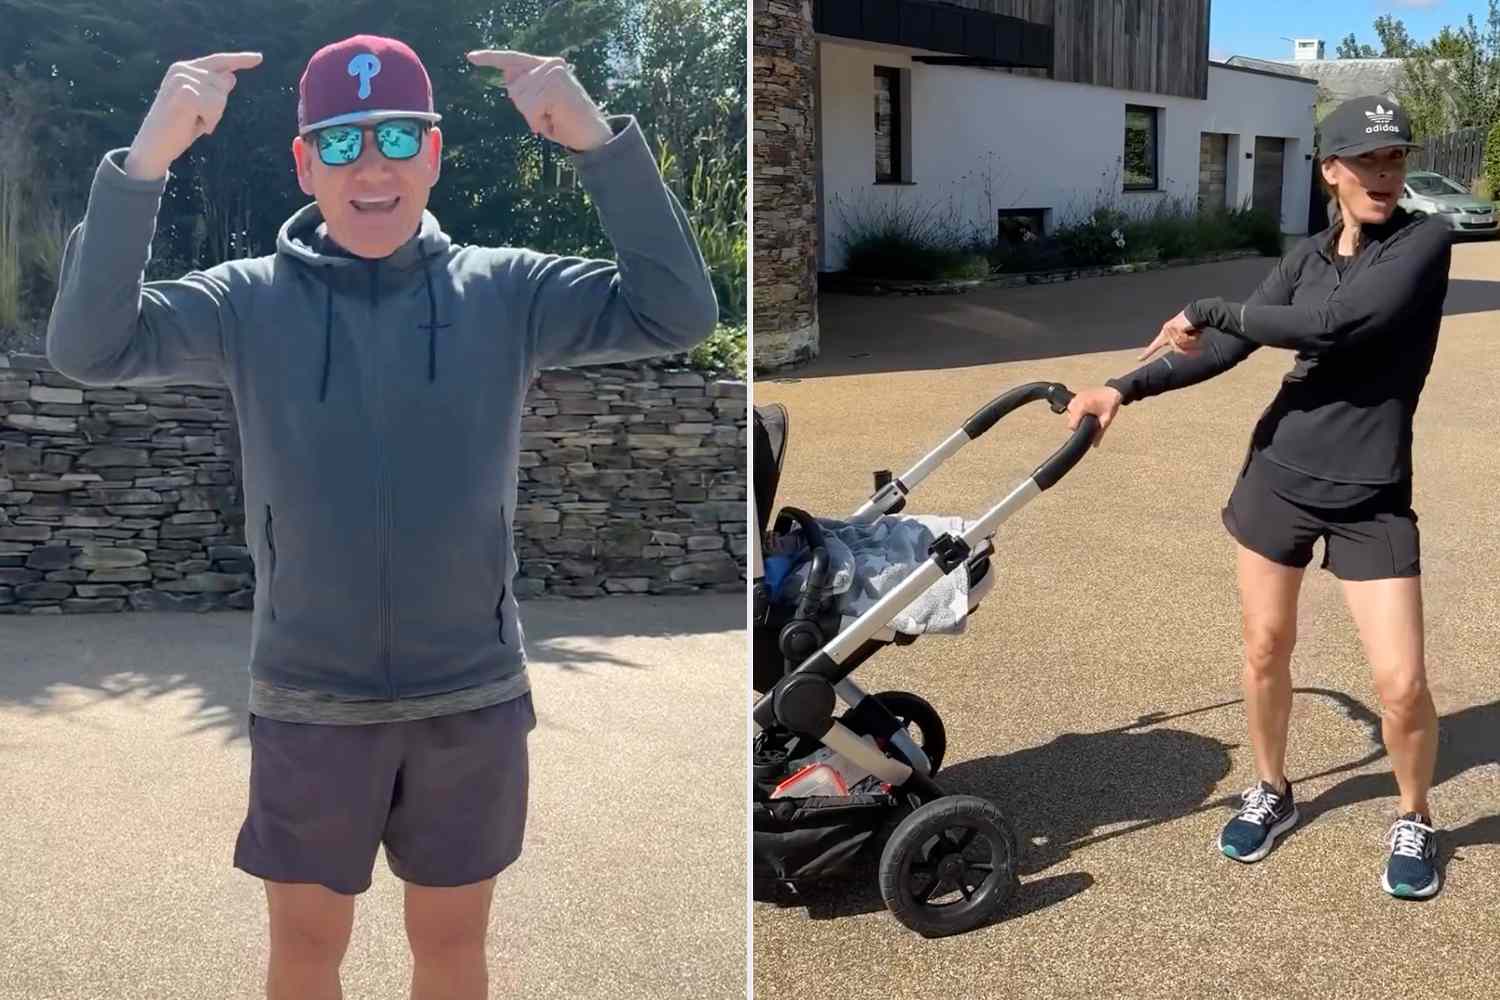 Gordon Ramsay Sings in a ‘Family Fit Check’ Video with His Wife Tana and Youngest Kids